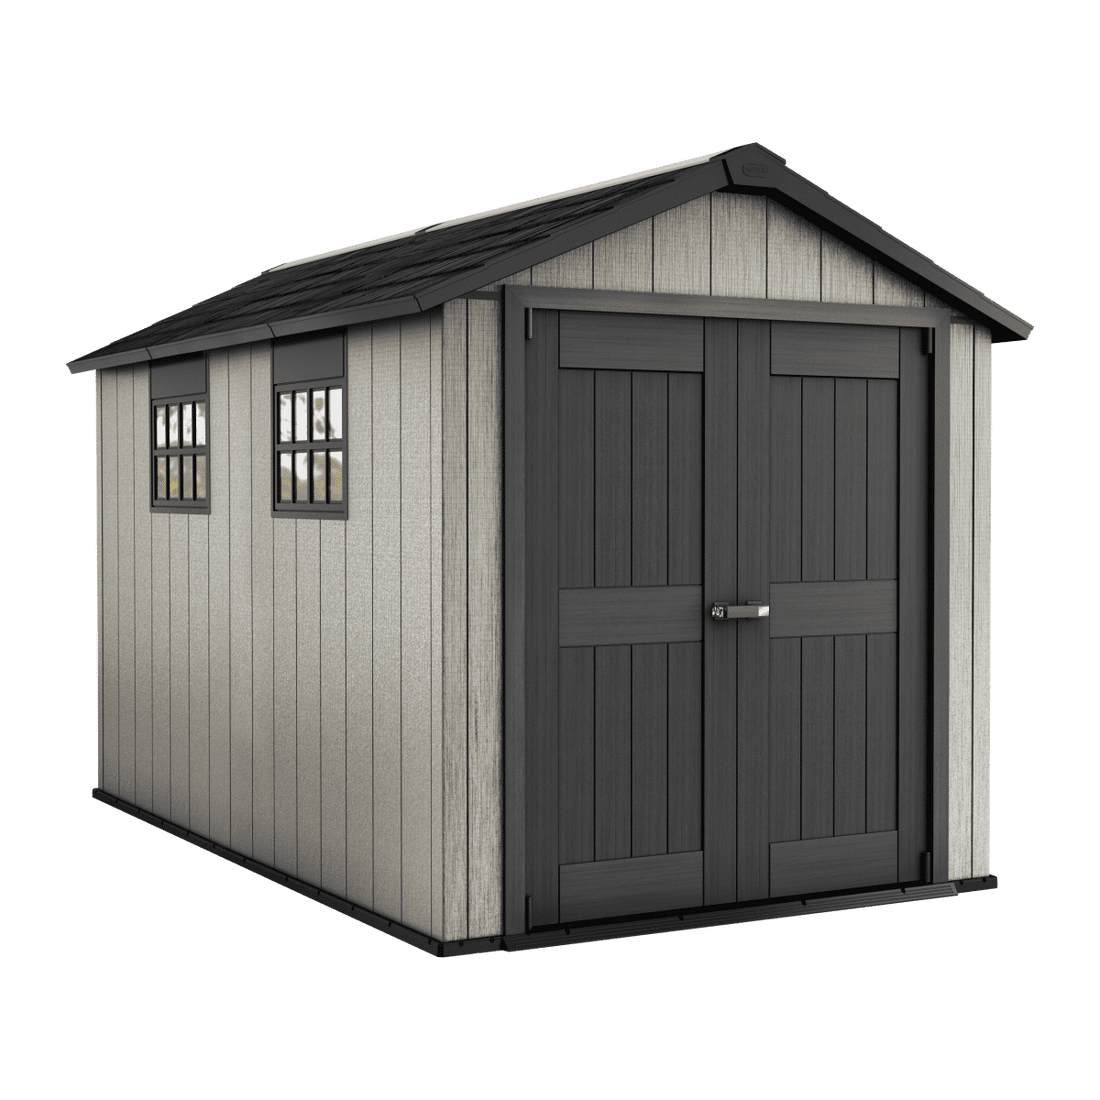 GARDEN SHED OAKLAND 7511 THICKNESS 20MM EXTERNAL DIMENSIONS 342X210X242H FLOOR INCLUDED - best price from Maltashopper.com BR500013054